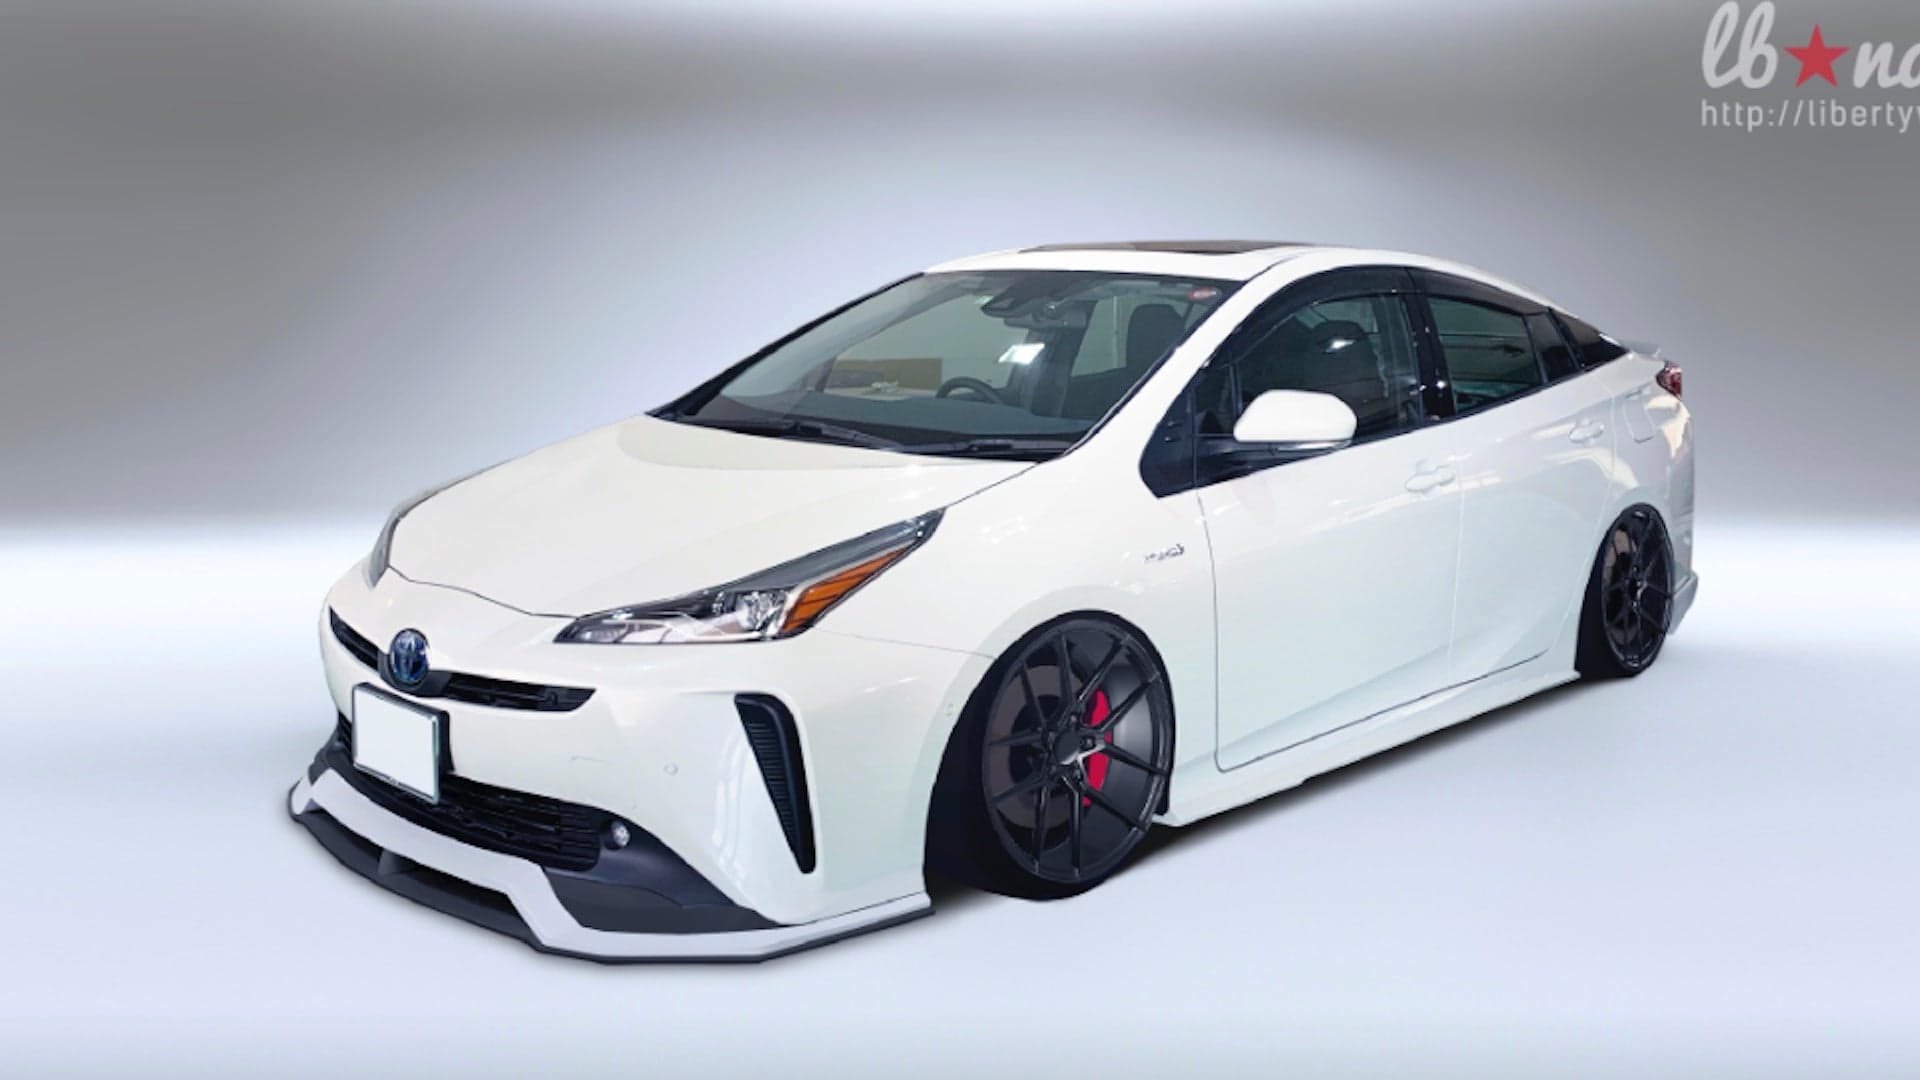 Fanboys Rejoice, There’s Now a Liberty Walk Body Kit for the 2019 Toyota Prius